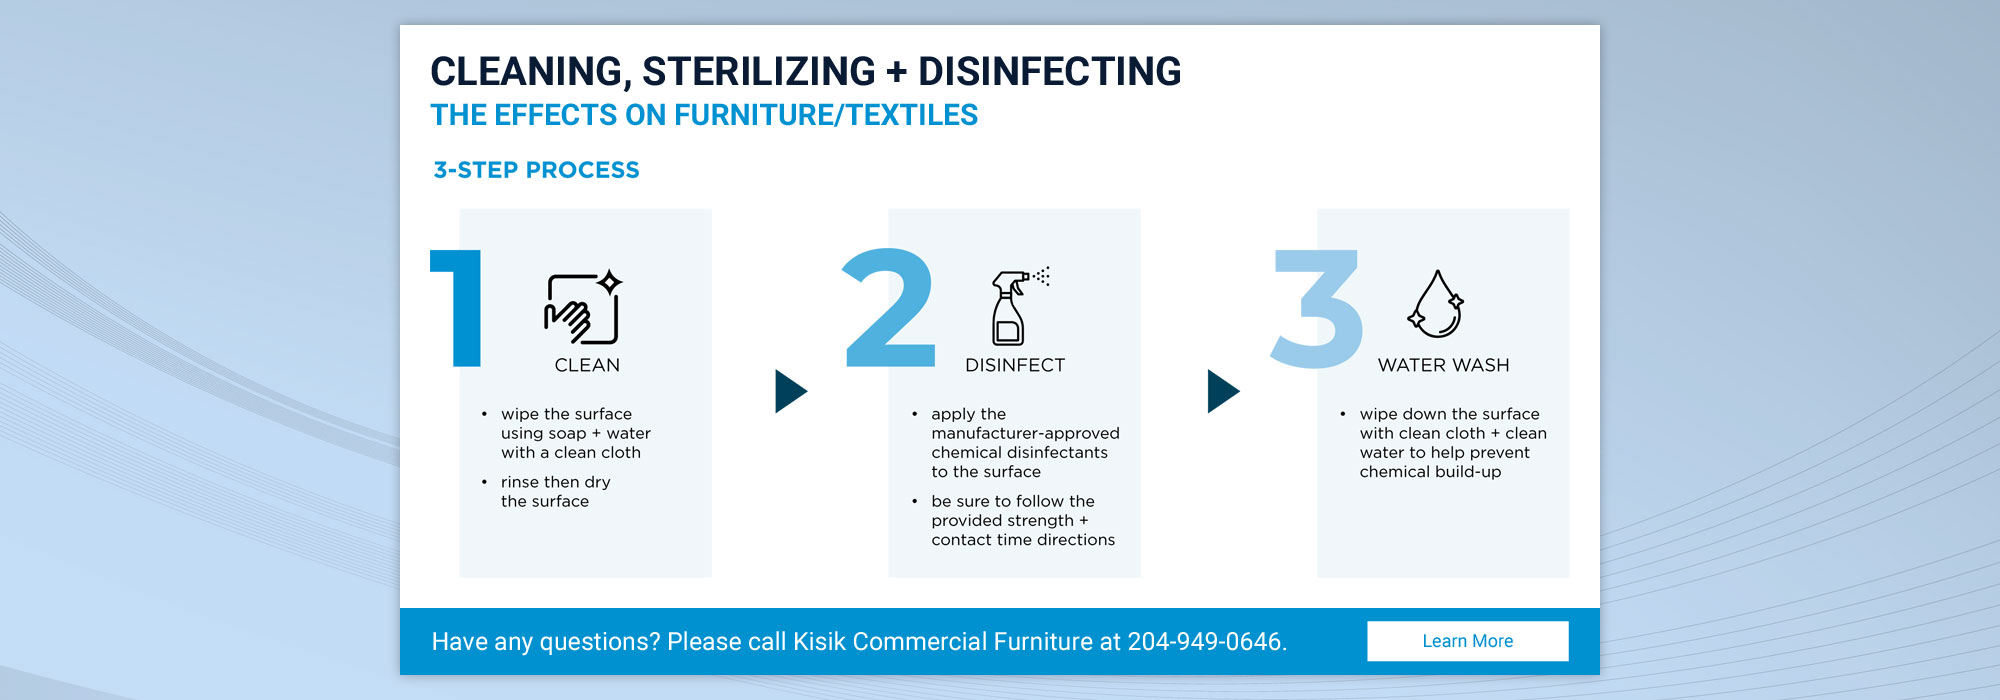 Cleaning, Sterilizing + Disinfecting